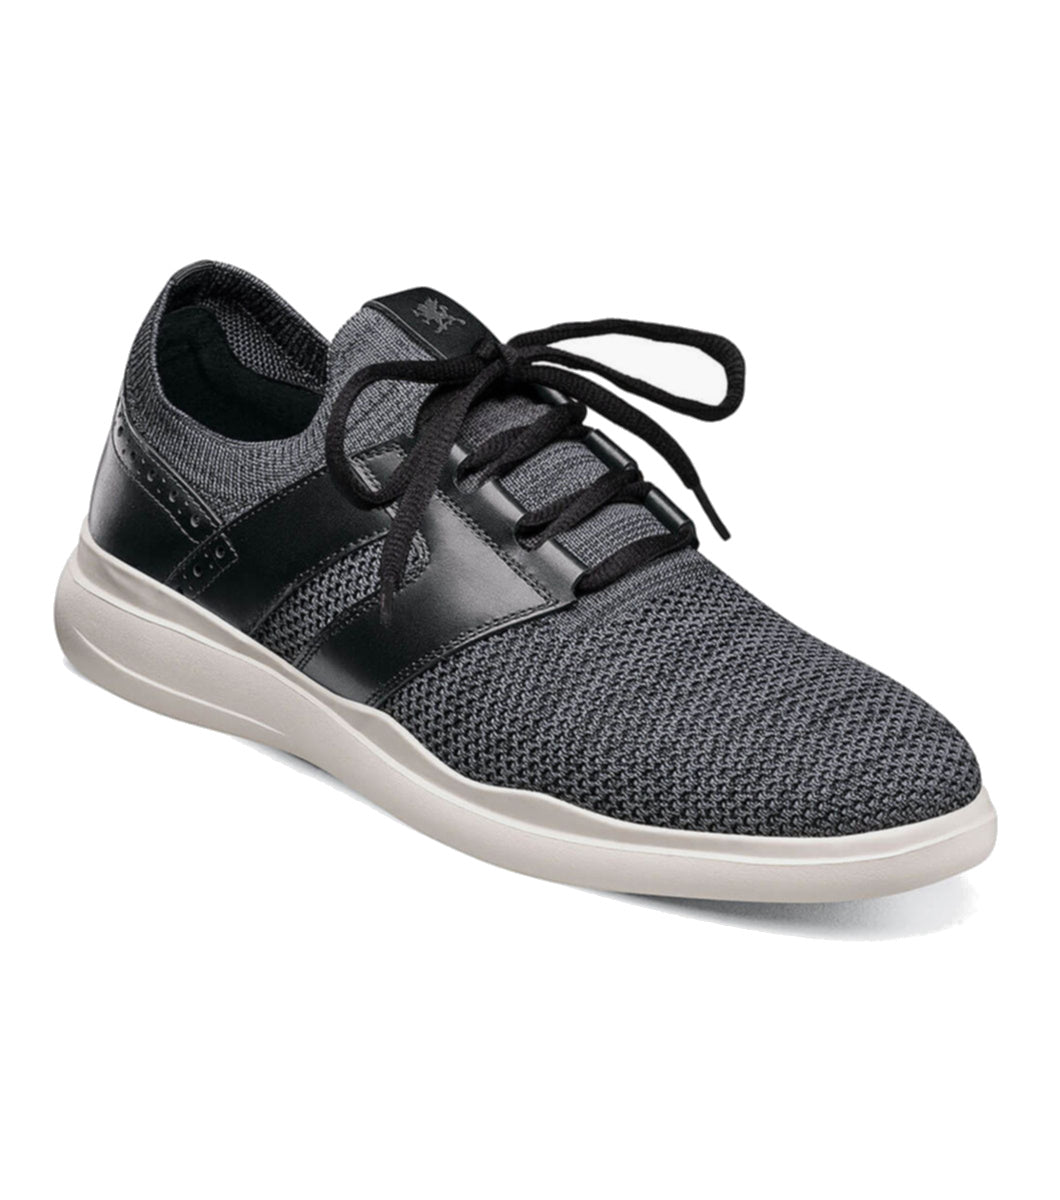 Stacy Adams Men's Moxley Knit Up Sneaker - Black/Gray – Alamo Shoes